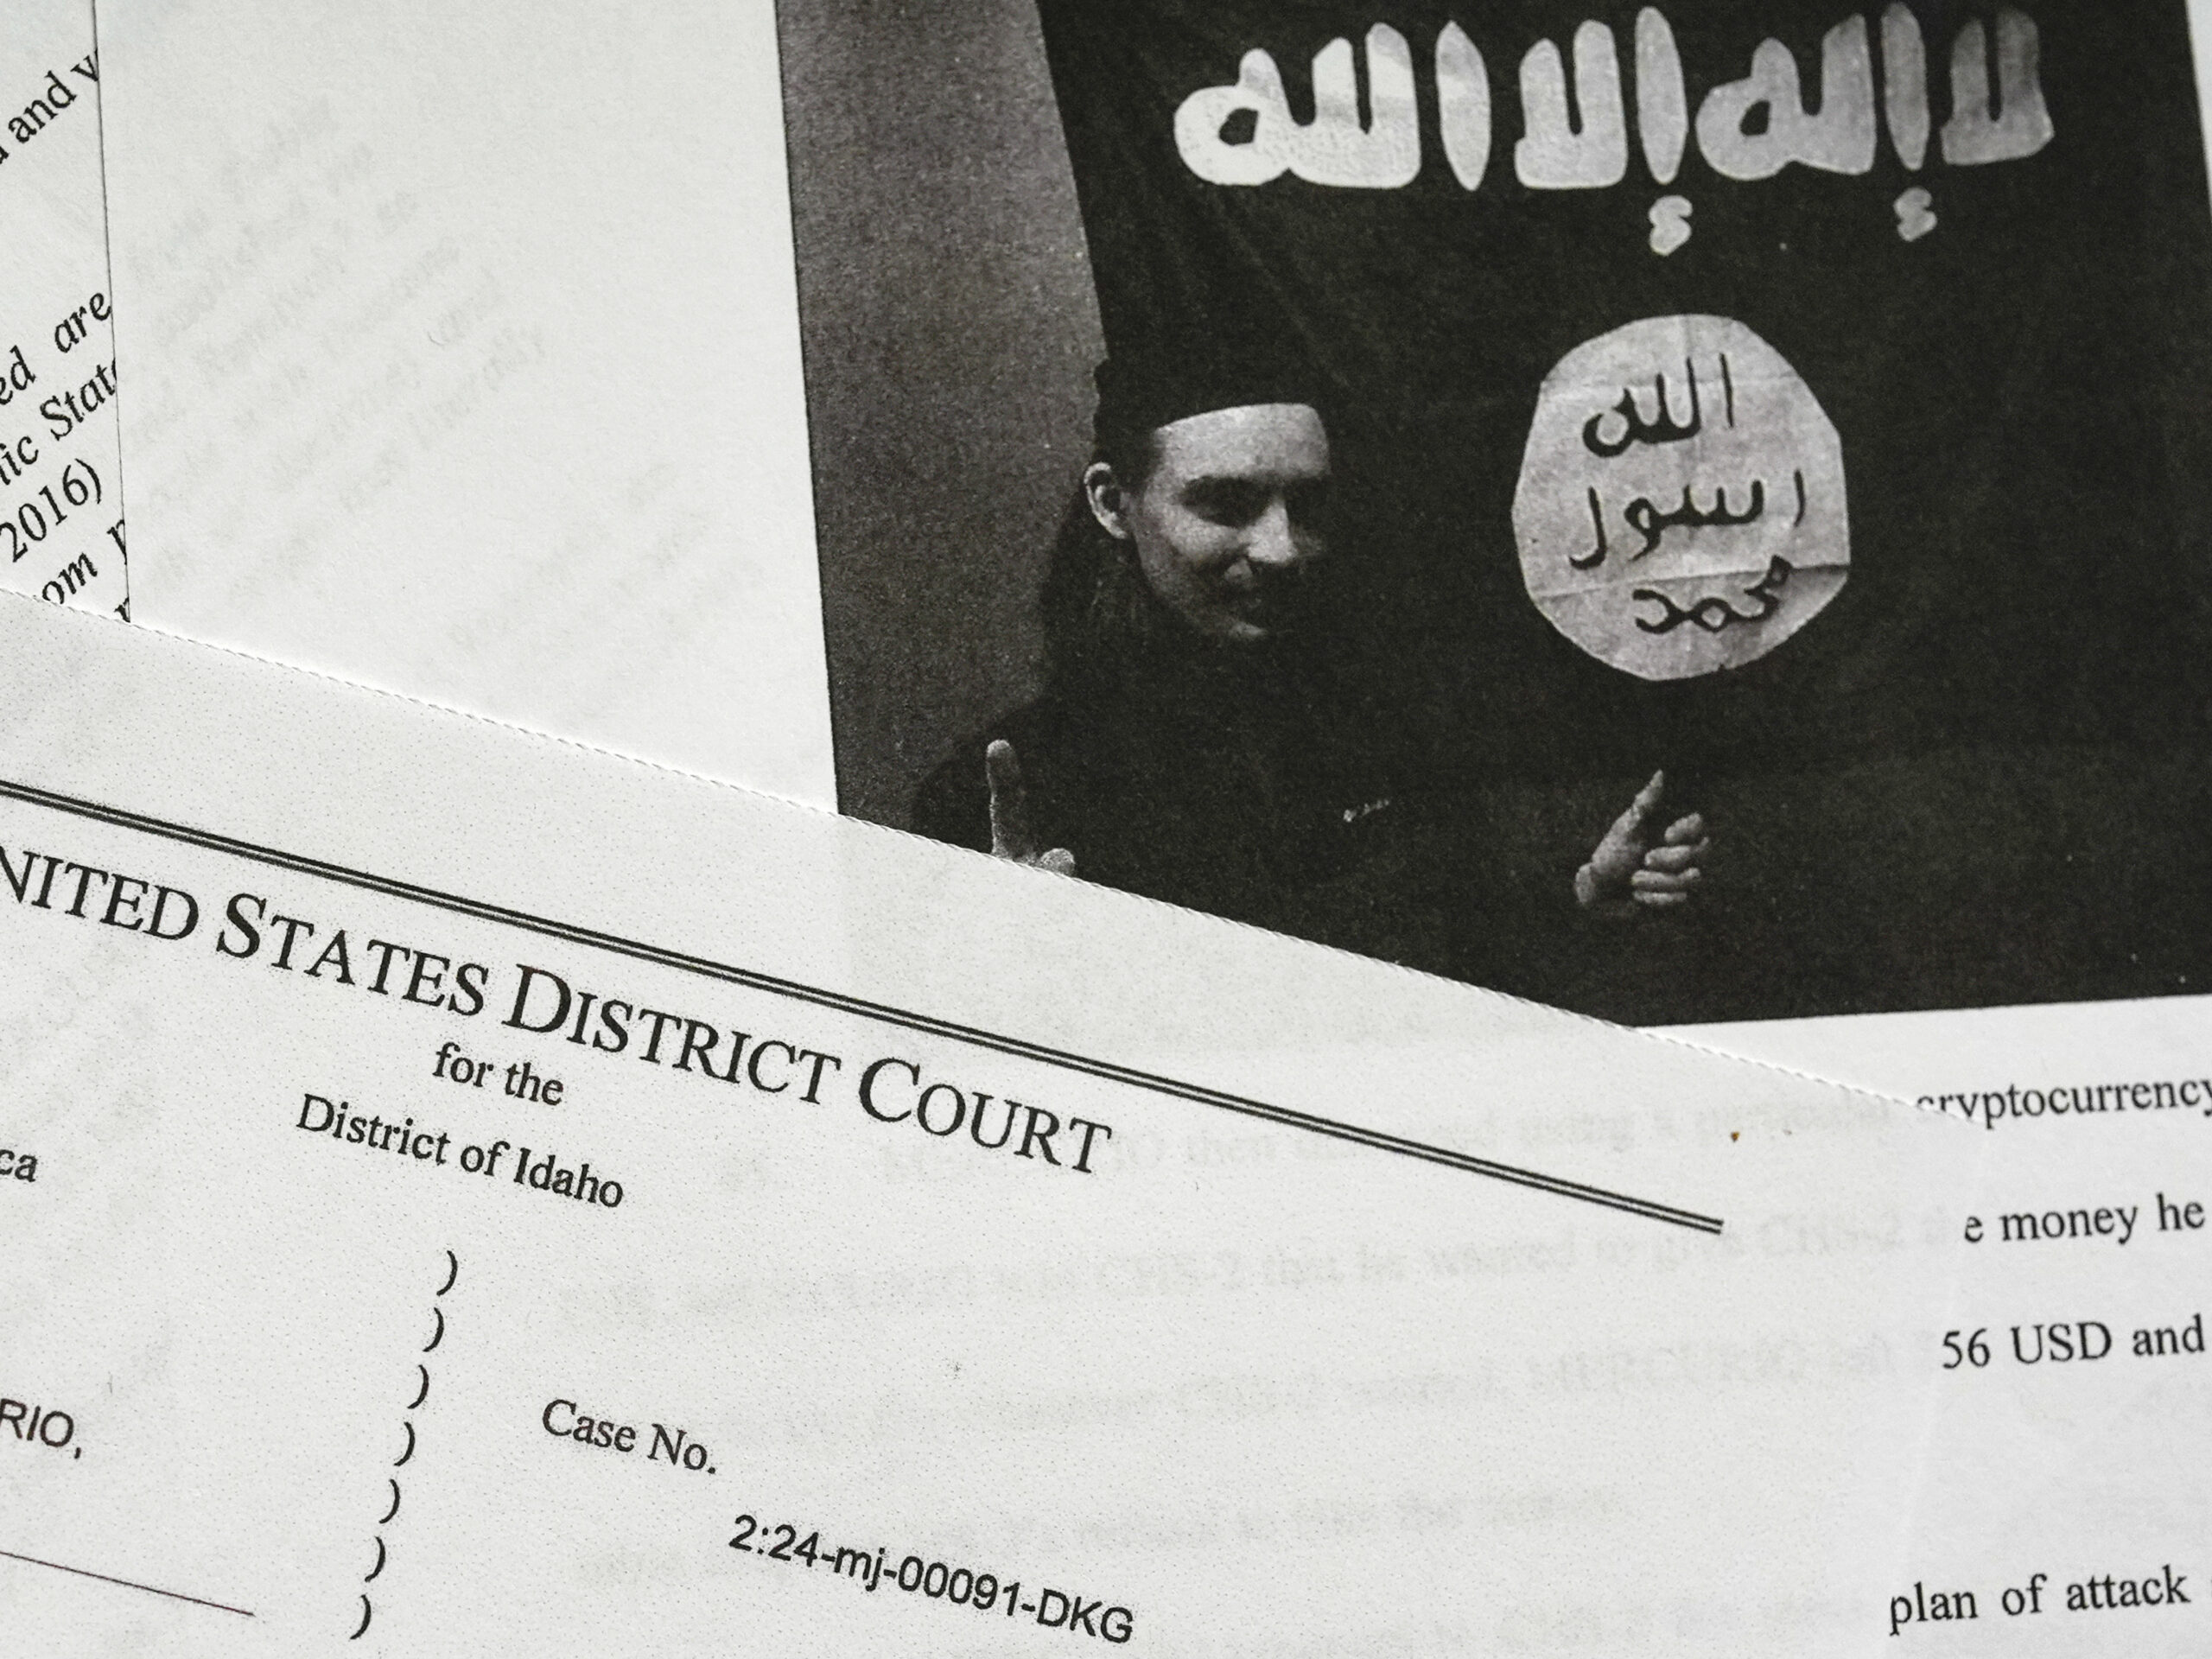 Prosecutors say an Idaho man planned a church attack to support the Islamic State